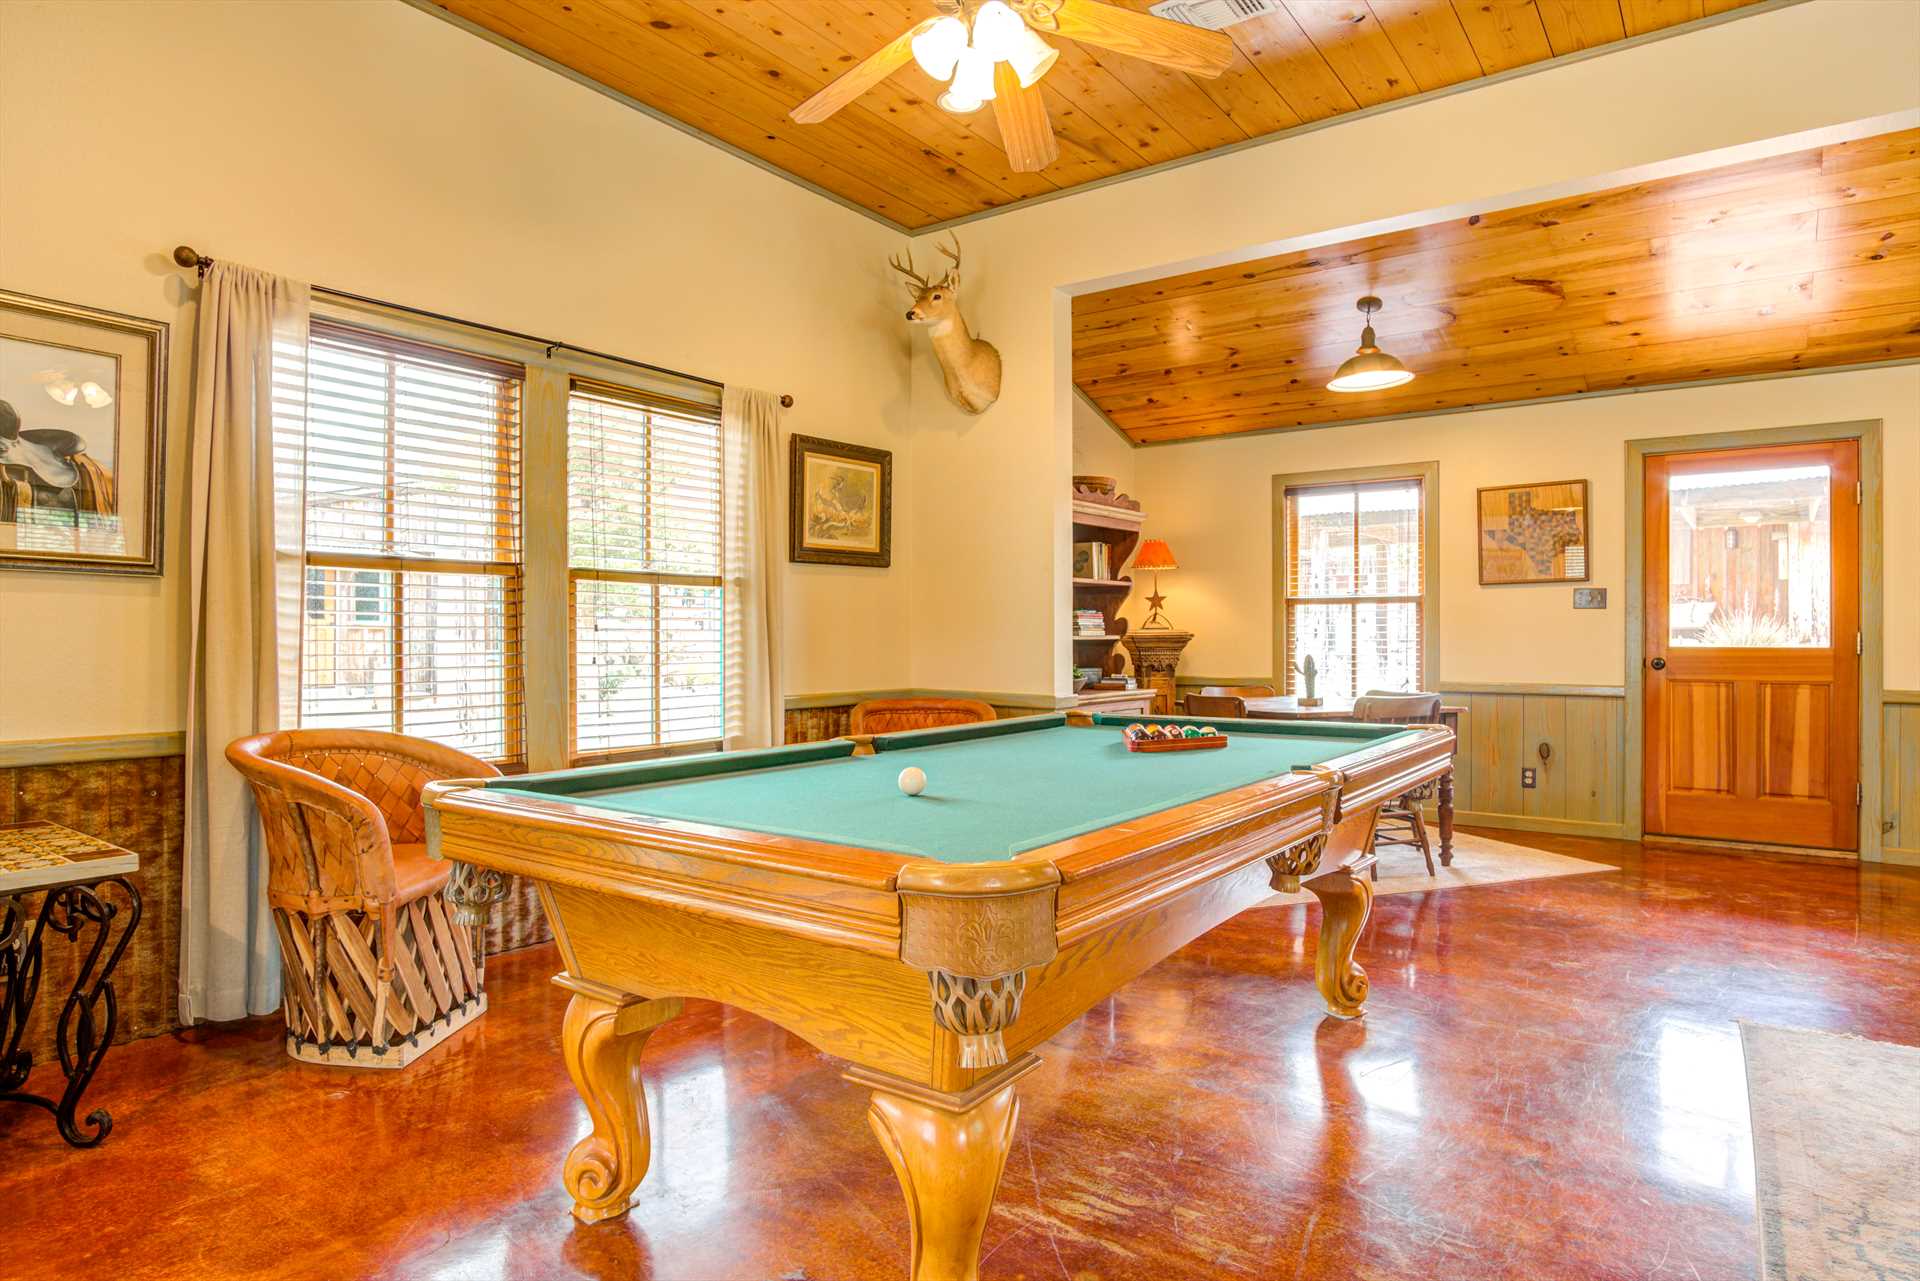                                                 With comfy chairs close by the pool table, there's no need to stand around waiting for your shot!